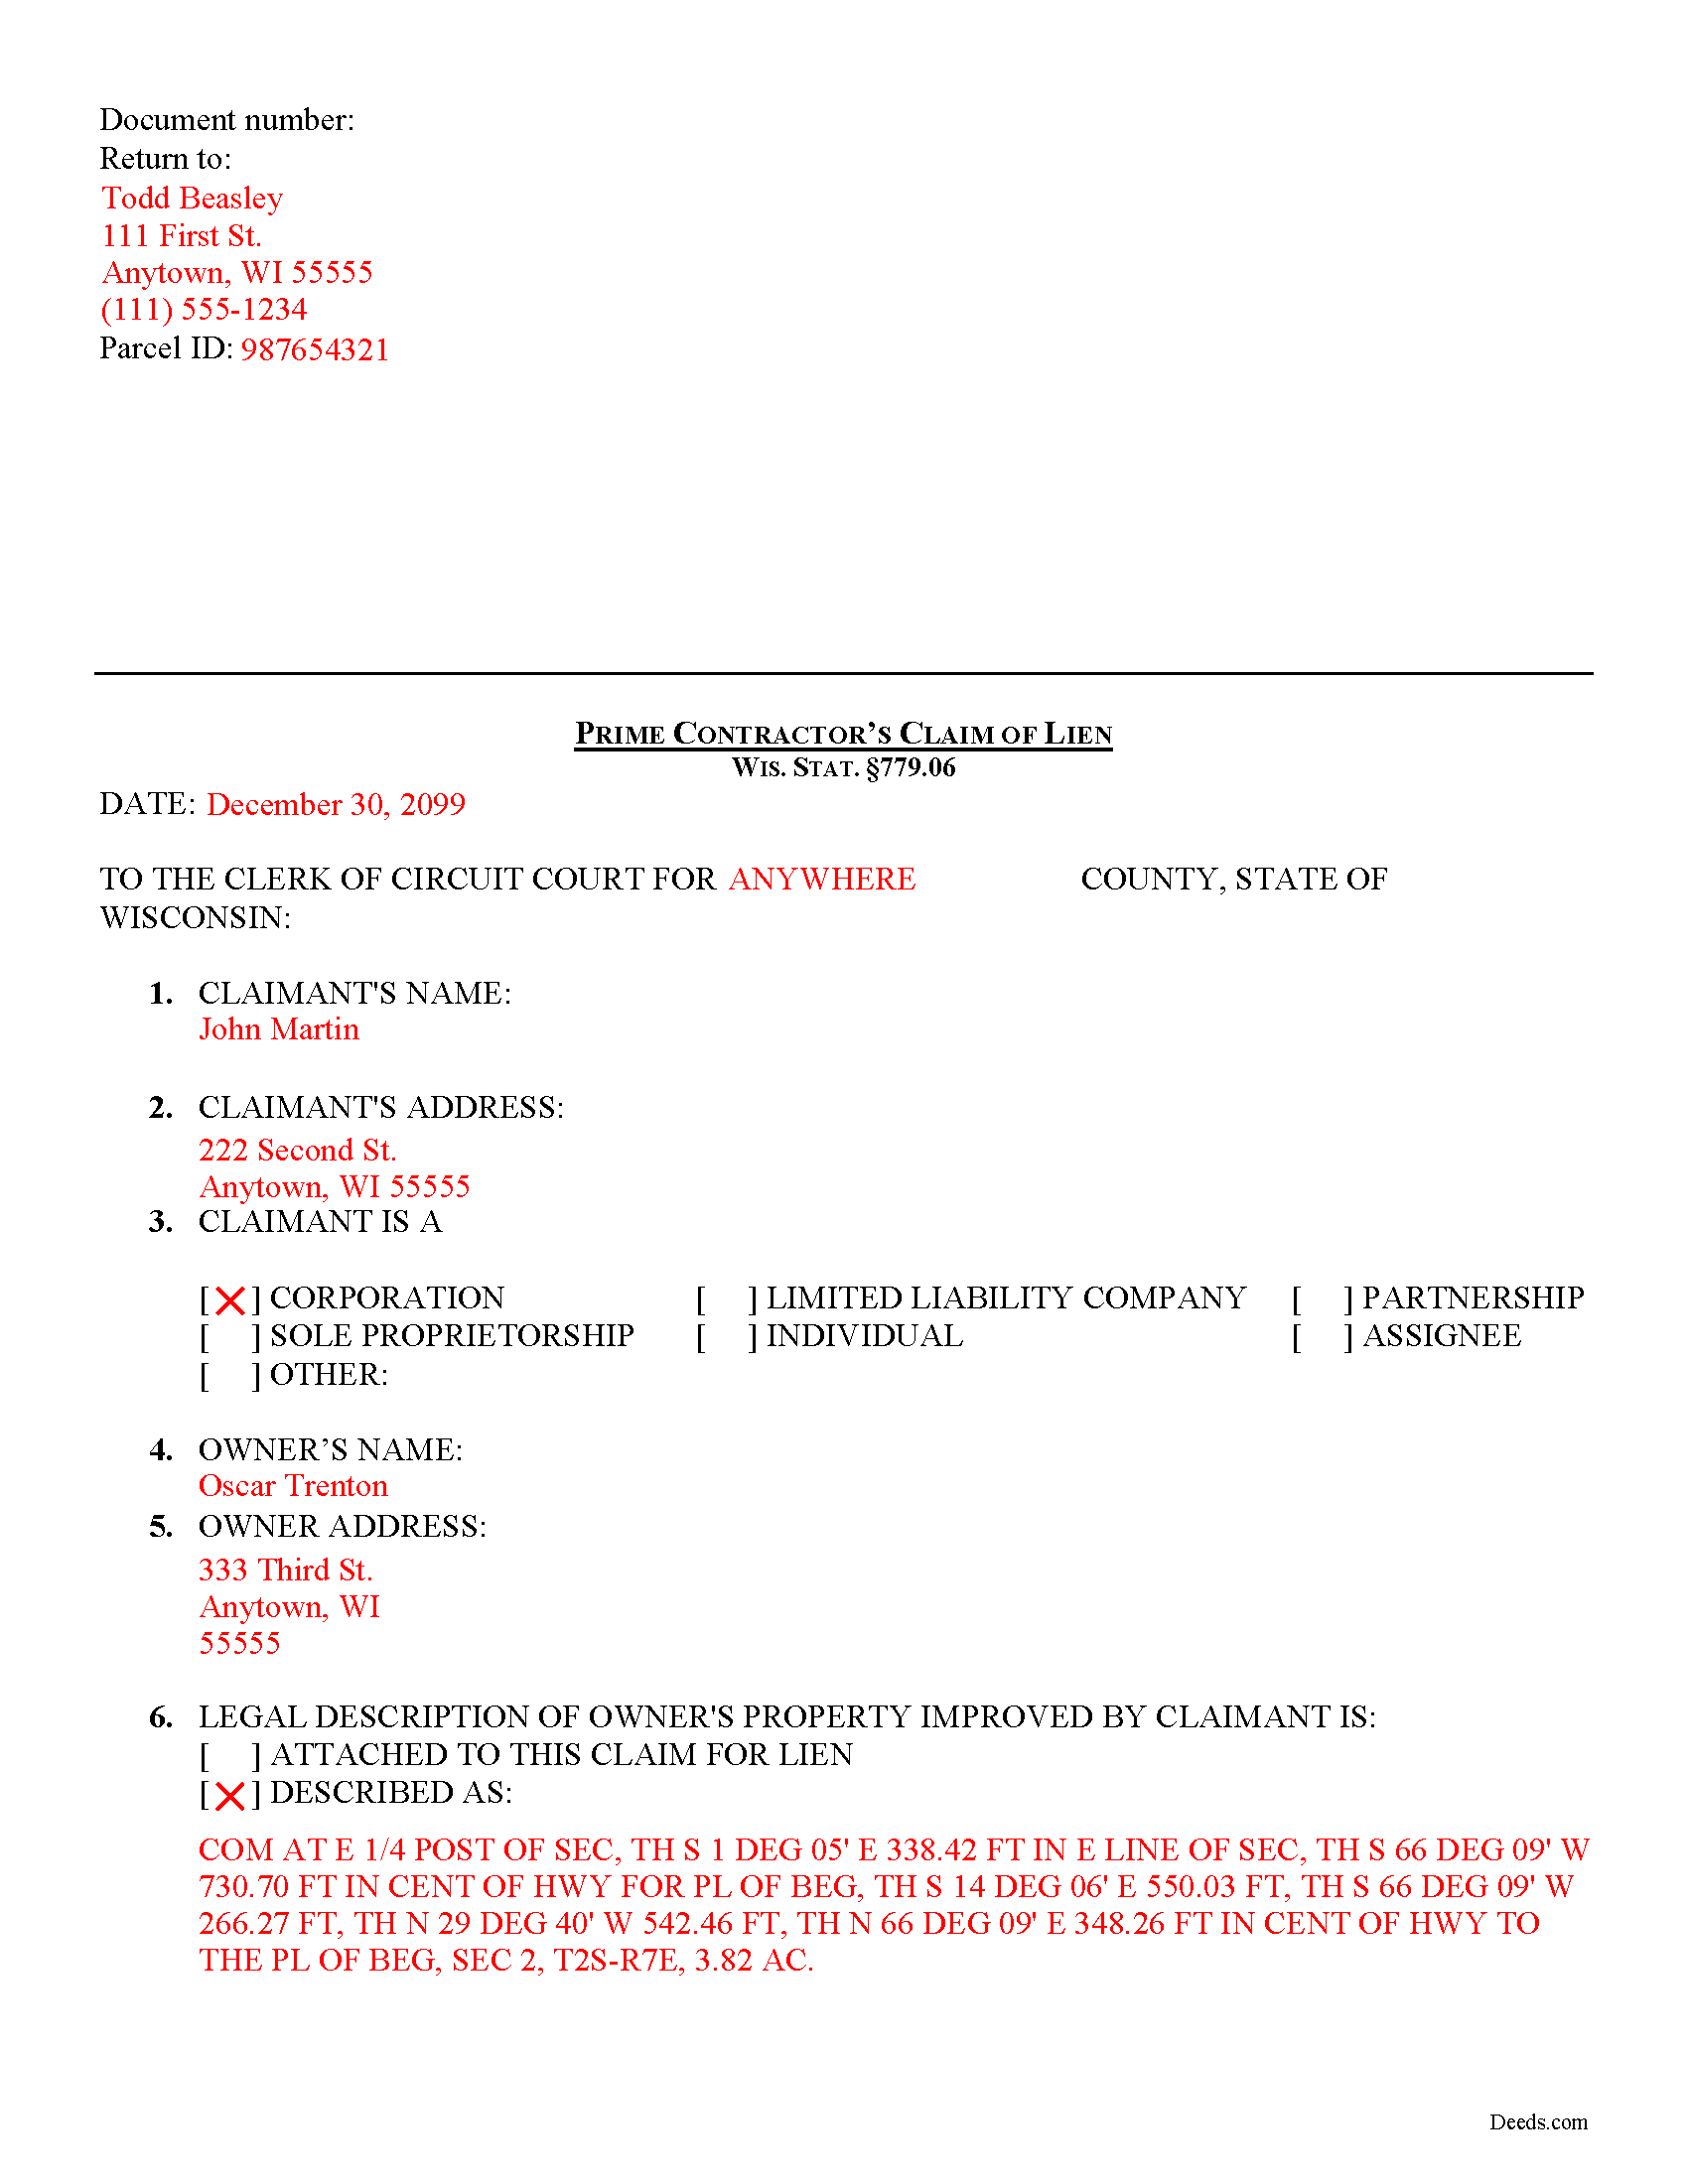 Completed Example of the Contractor Claim of Lien Document